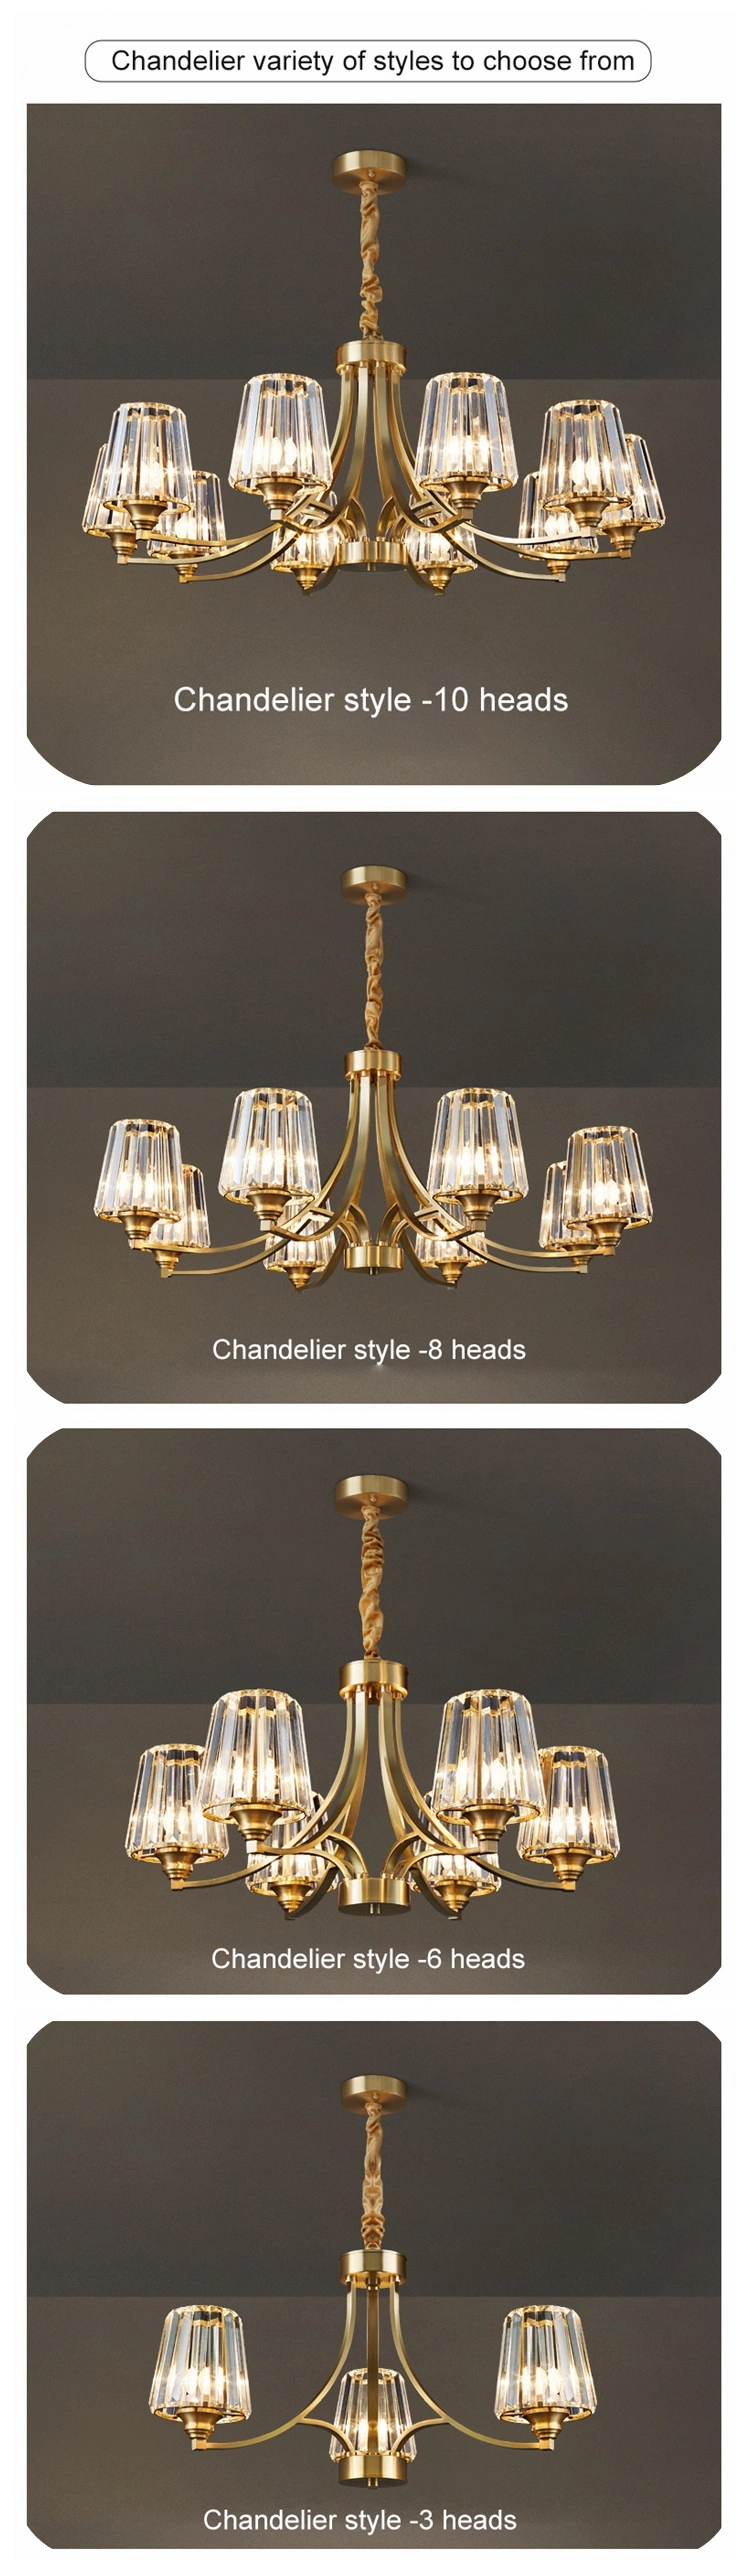 Contemporary Lighting Crystal Chandelier Cheap Large Hotel Lobby Chandelier